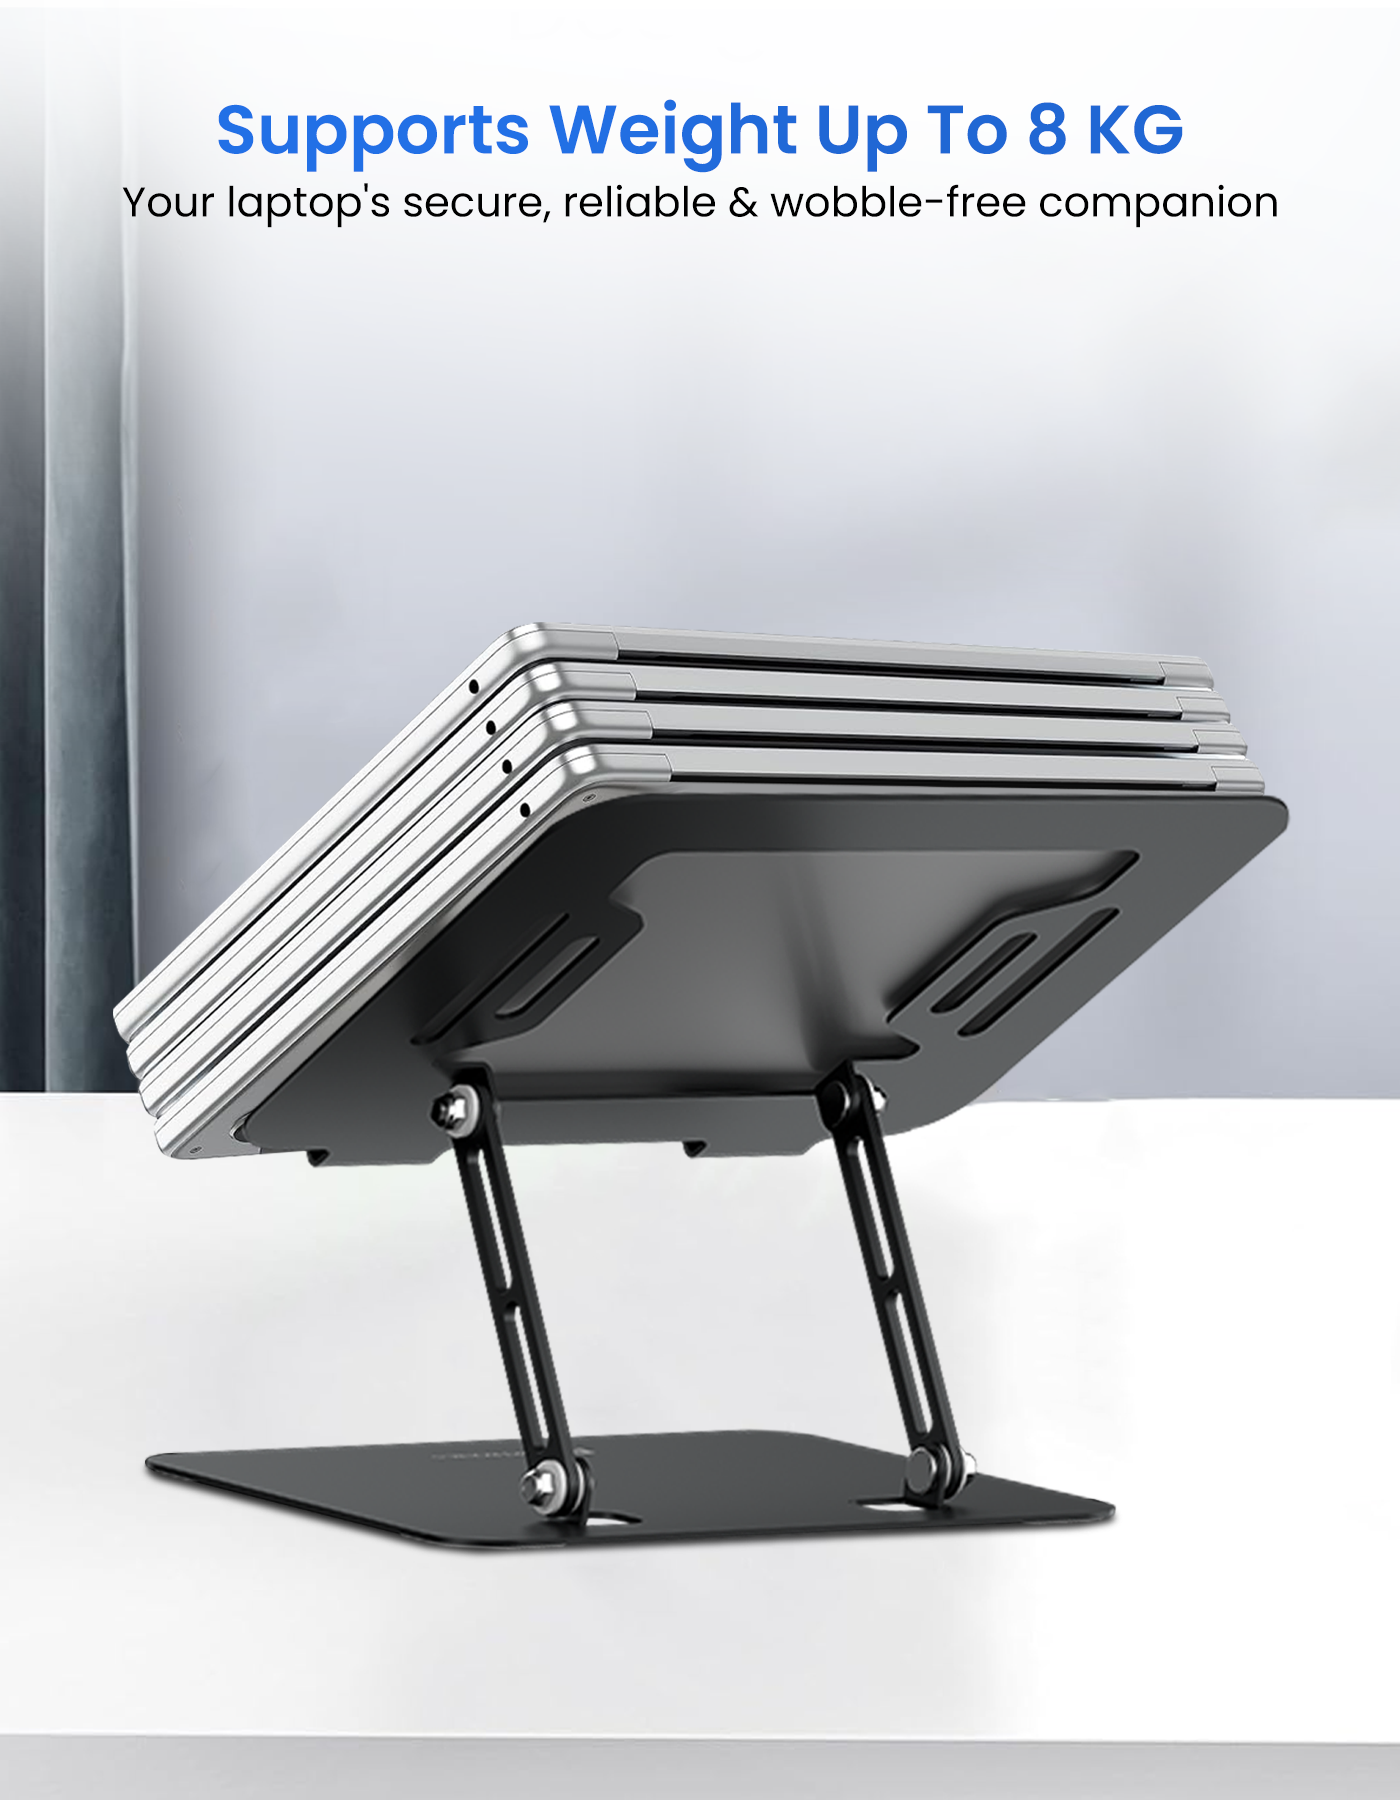 Portronics My Buddy K3 Pro laptop stand comes with anti slip silicone grip